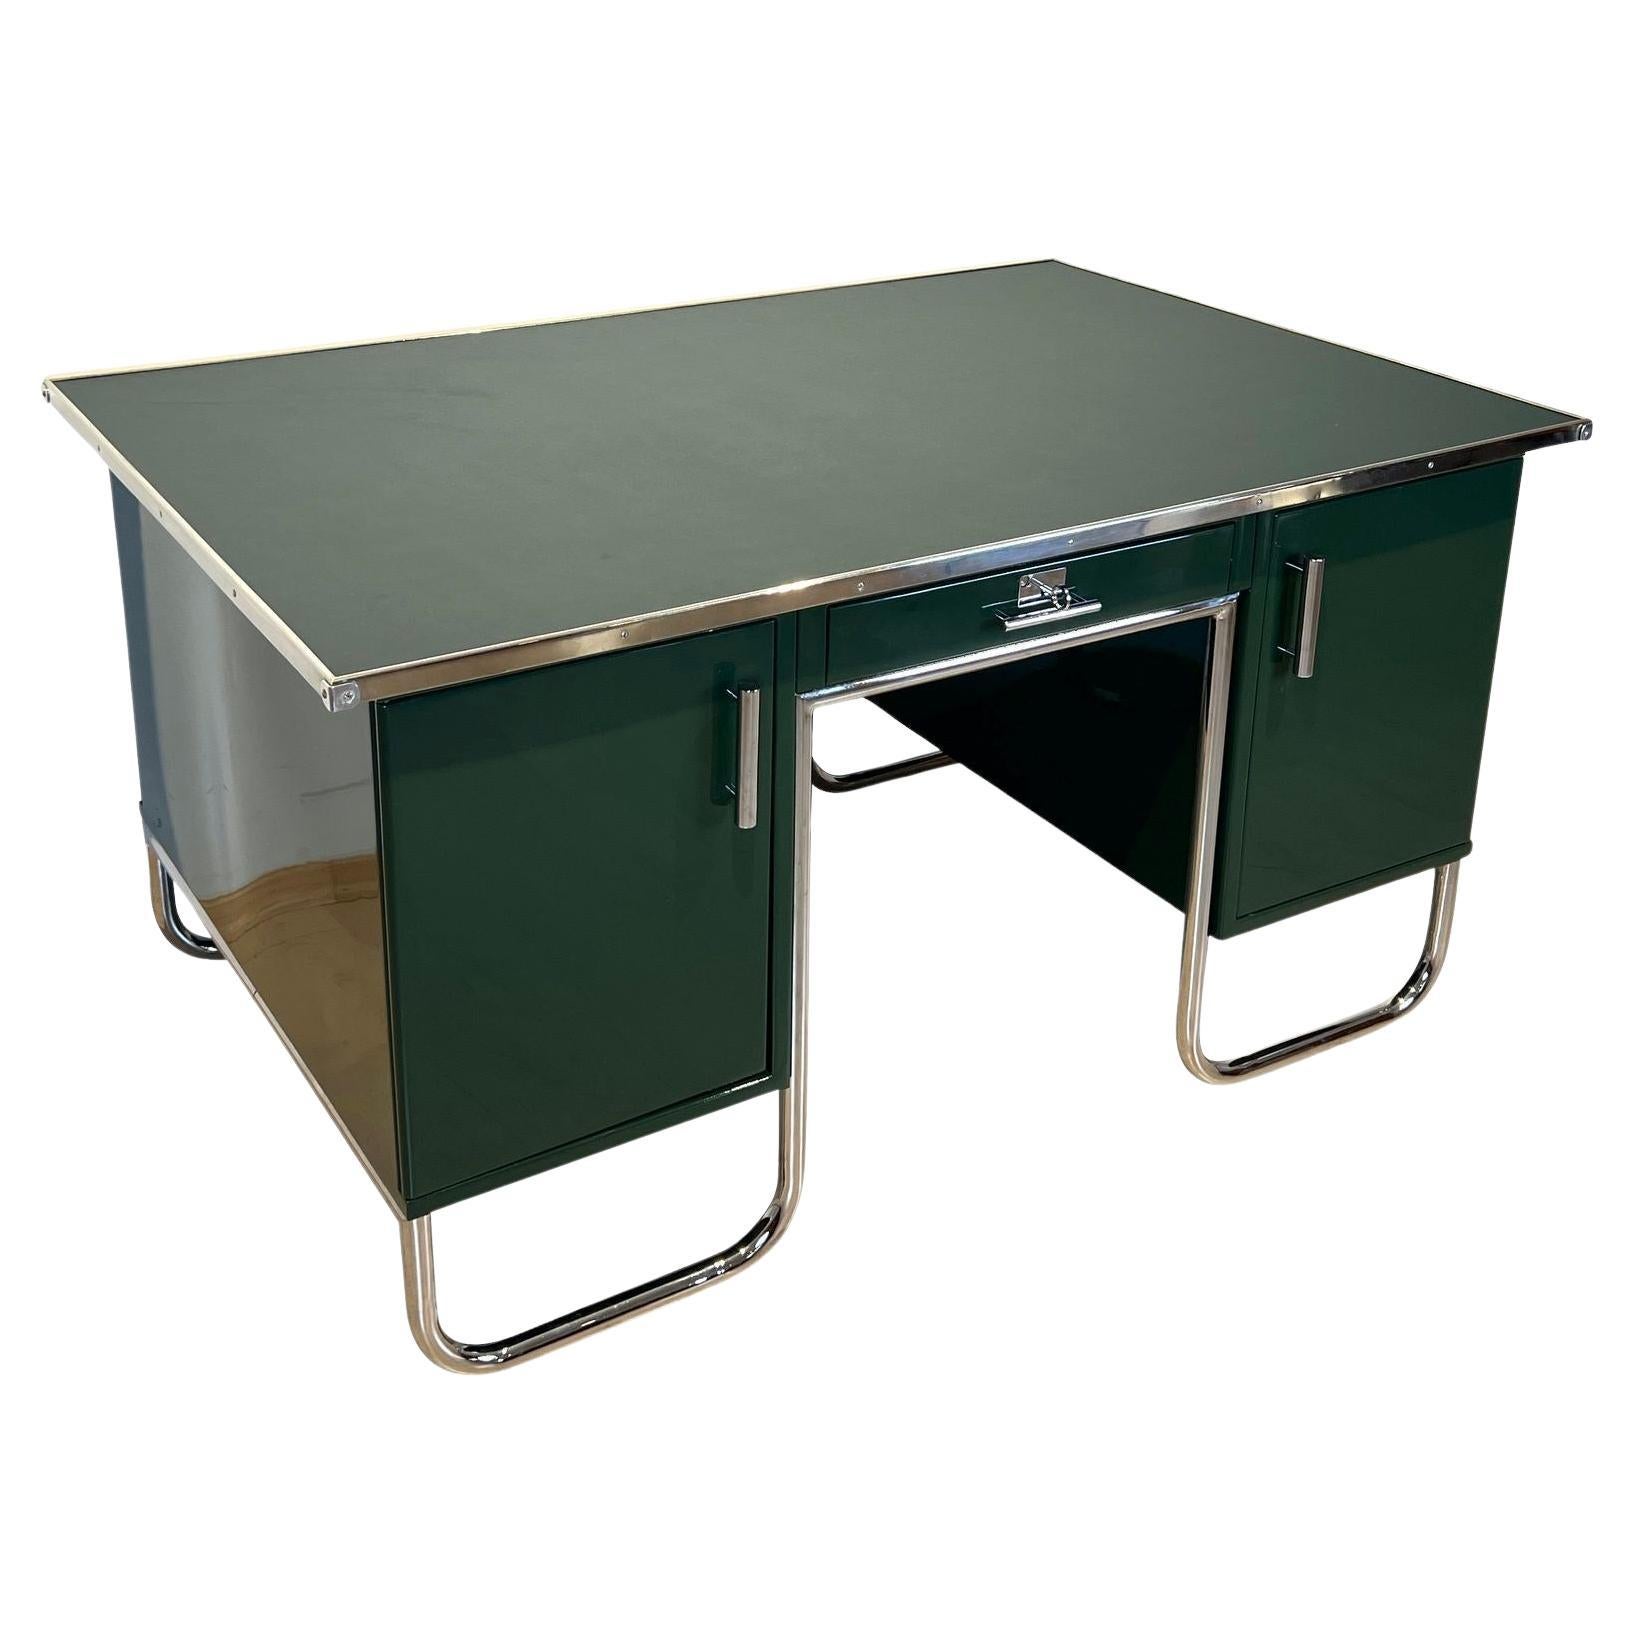 Large Bauhaus Partners Desk, Green Lacquer, Metal, Steeltube, Germany circa 1930 For Sale